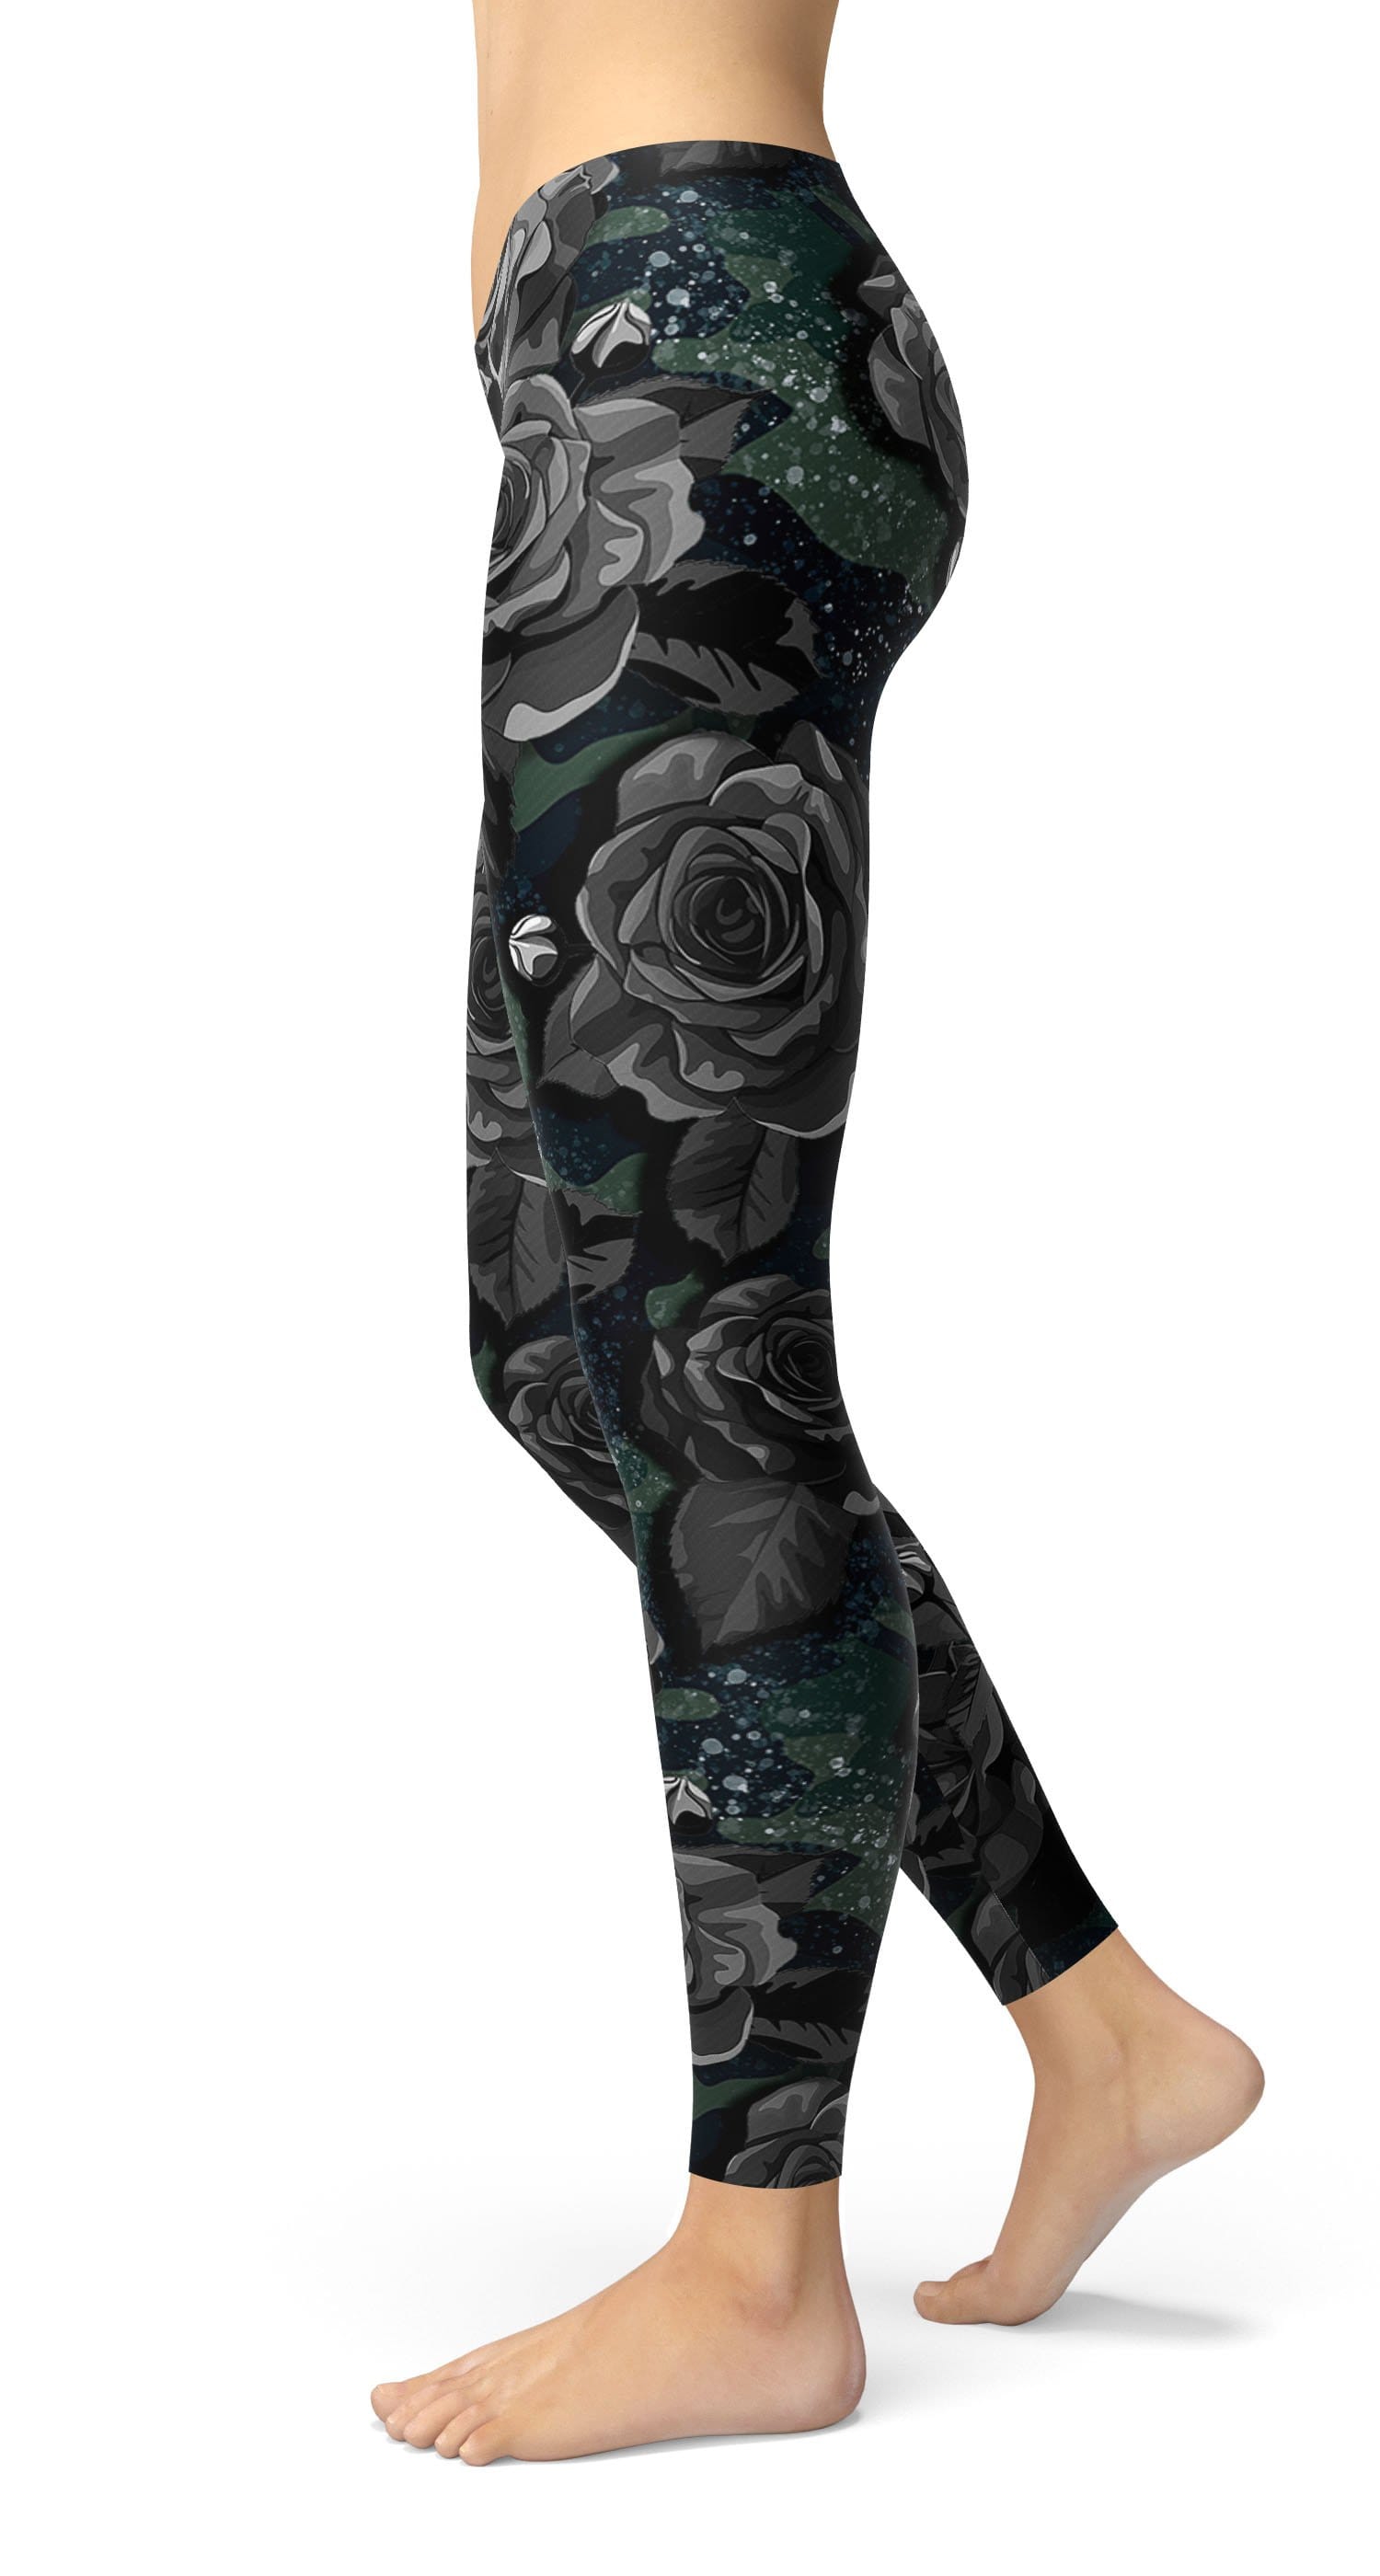 camouflage with flower  Leggings - US FITGIRLS